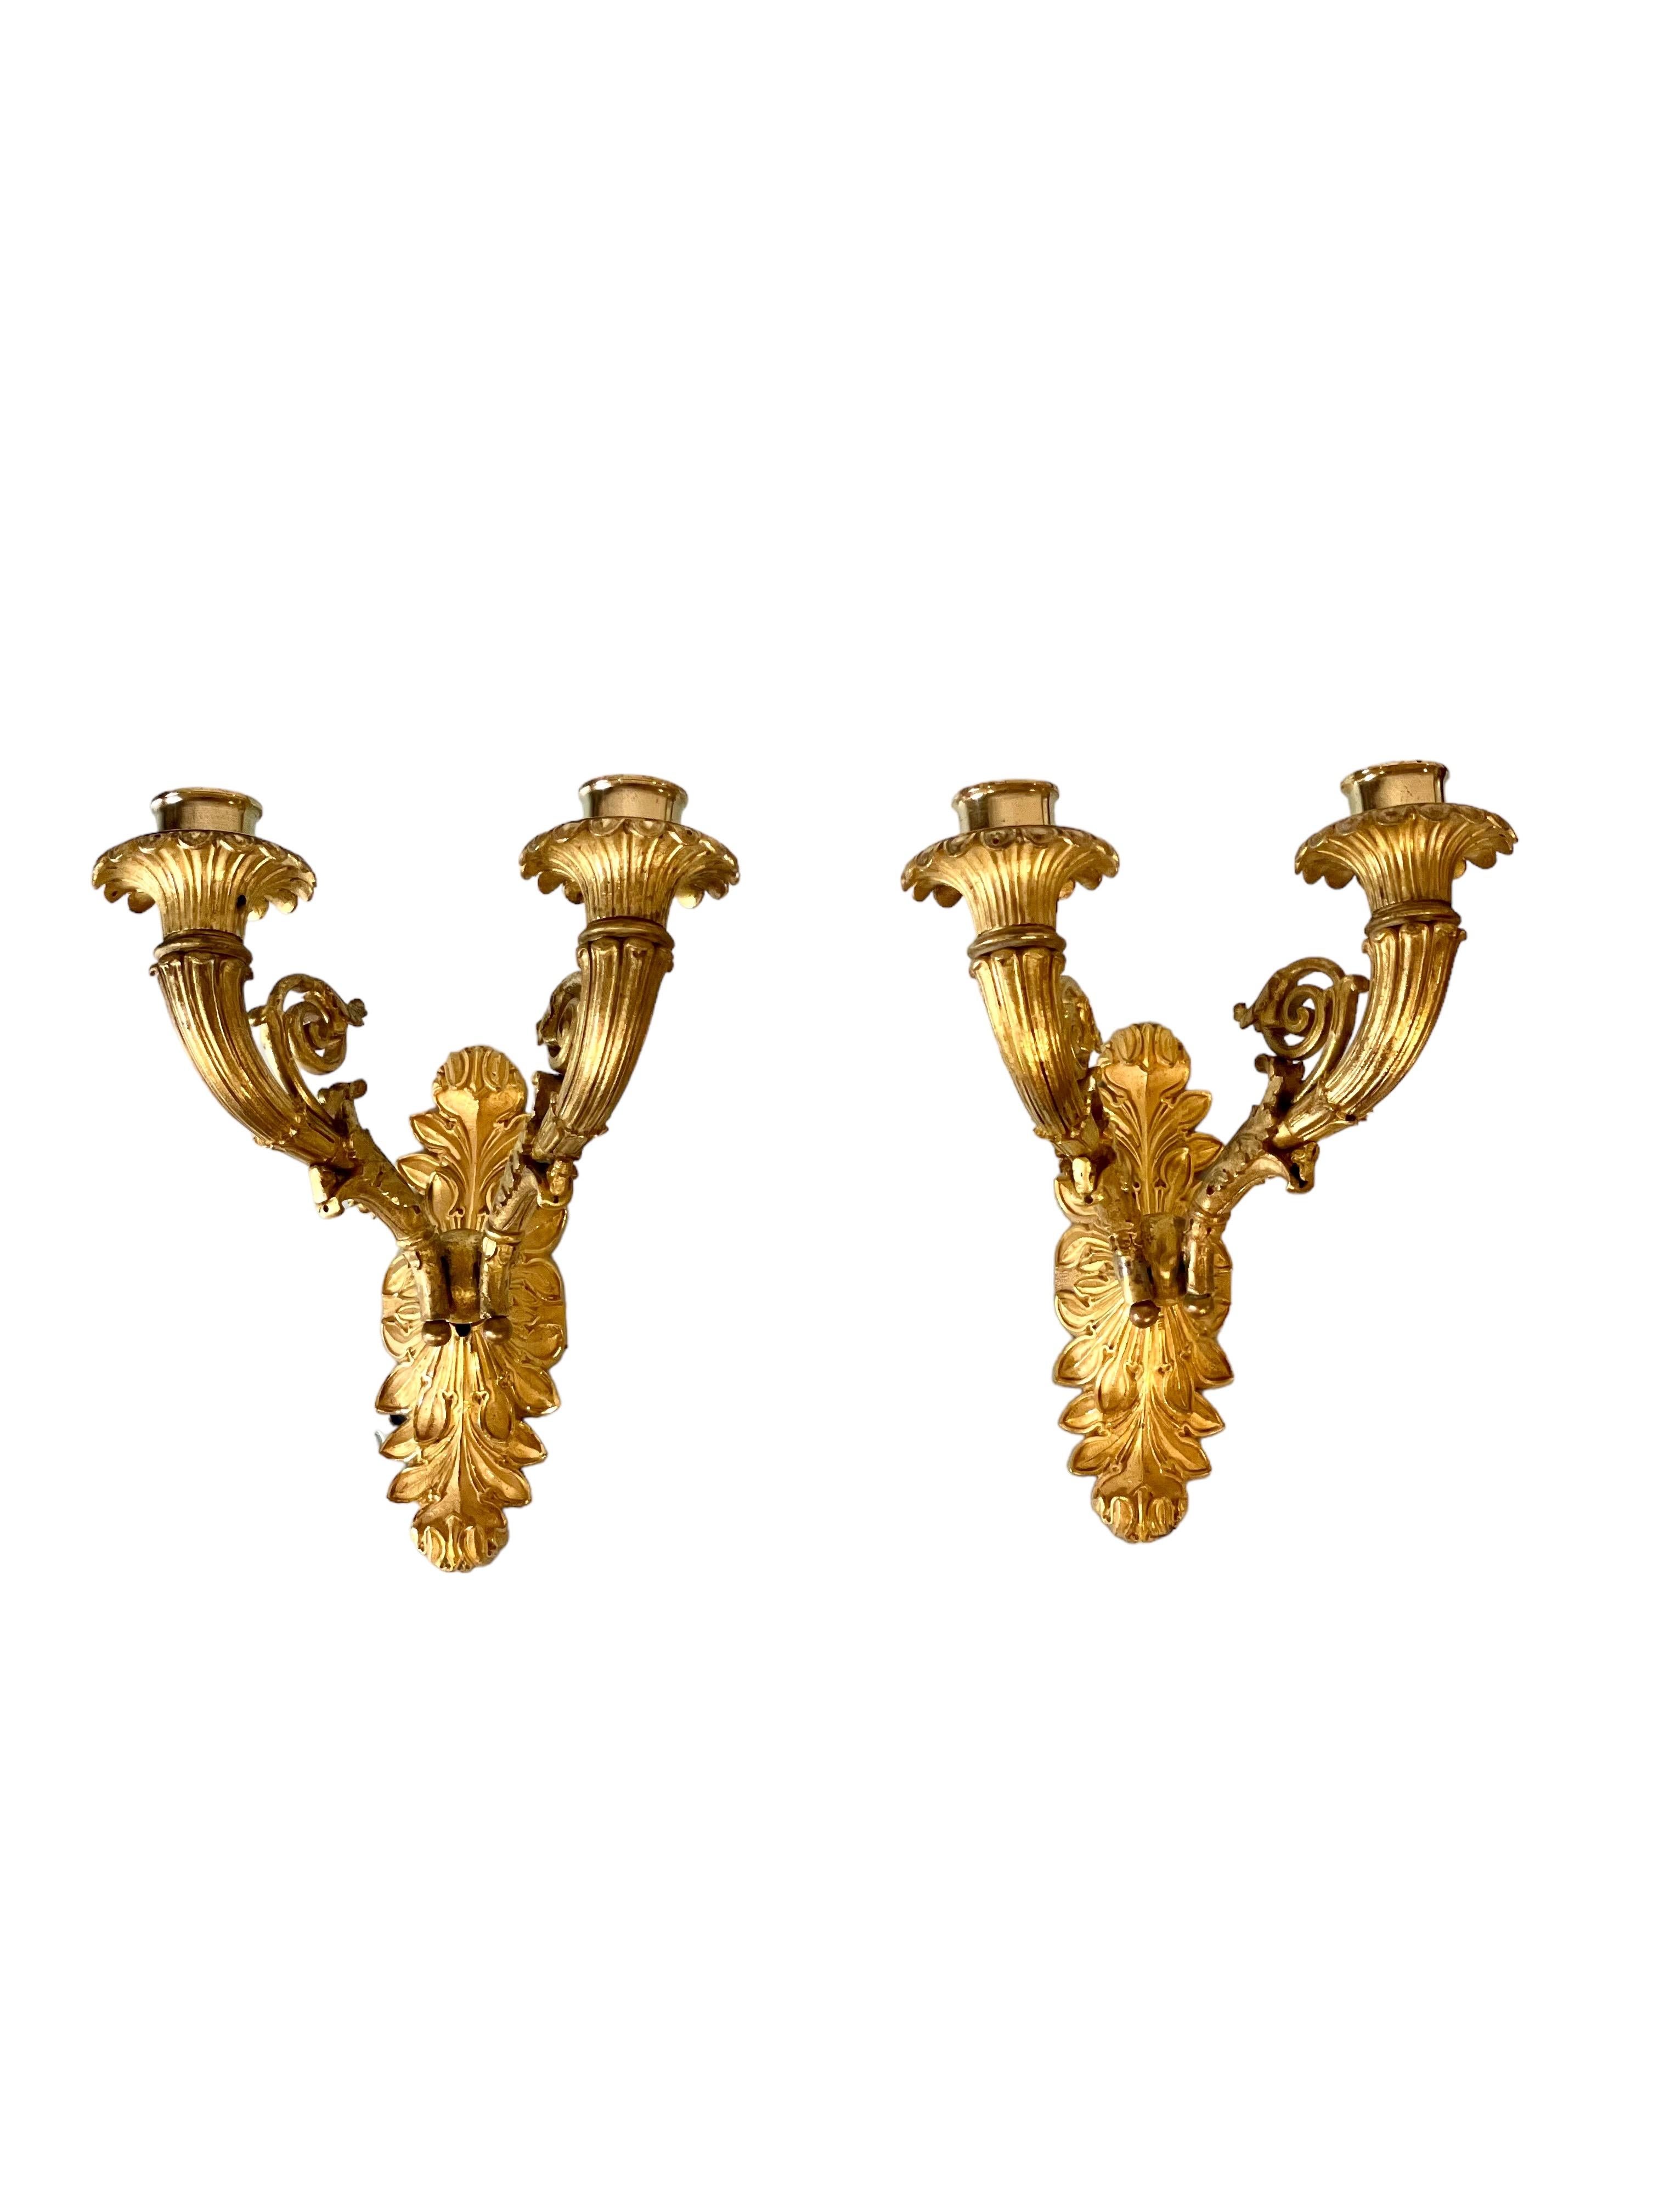 A splendid pair of French Restauration period (19th century) gilt-bronze two-light wall sconces, finely chased and cast in a stunning design of leafy scrollwork. Drip trays in the form of stylised trumpet flowers spring skywards from a backplate of